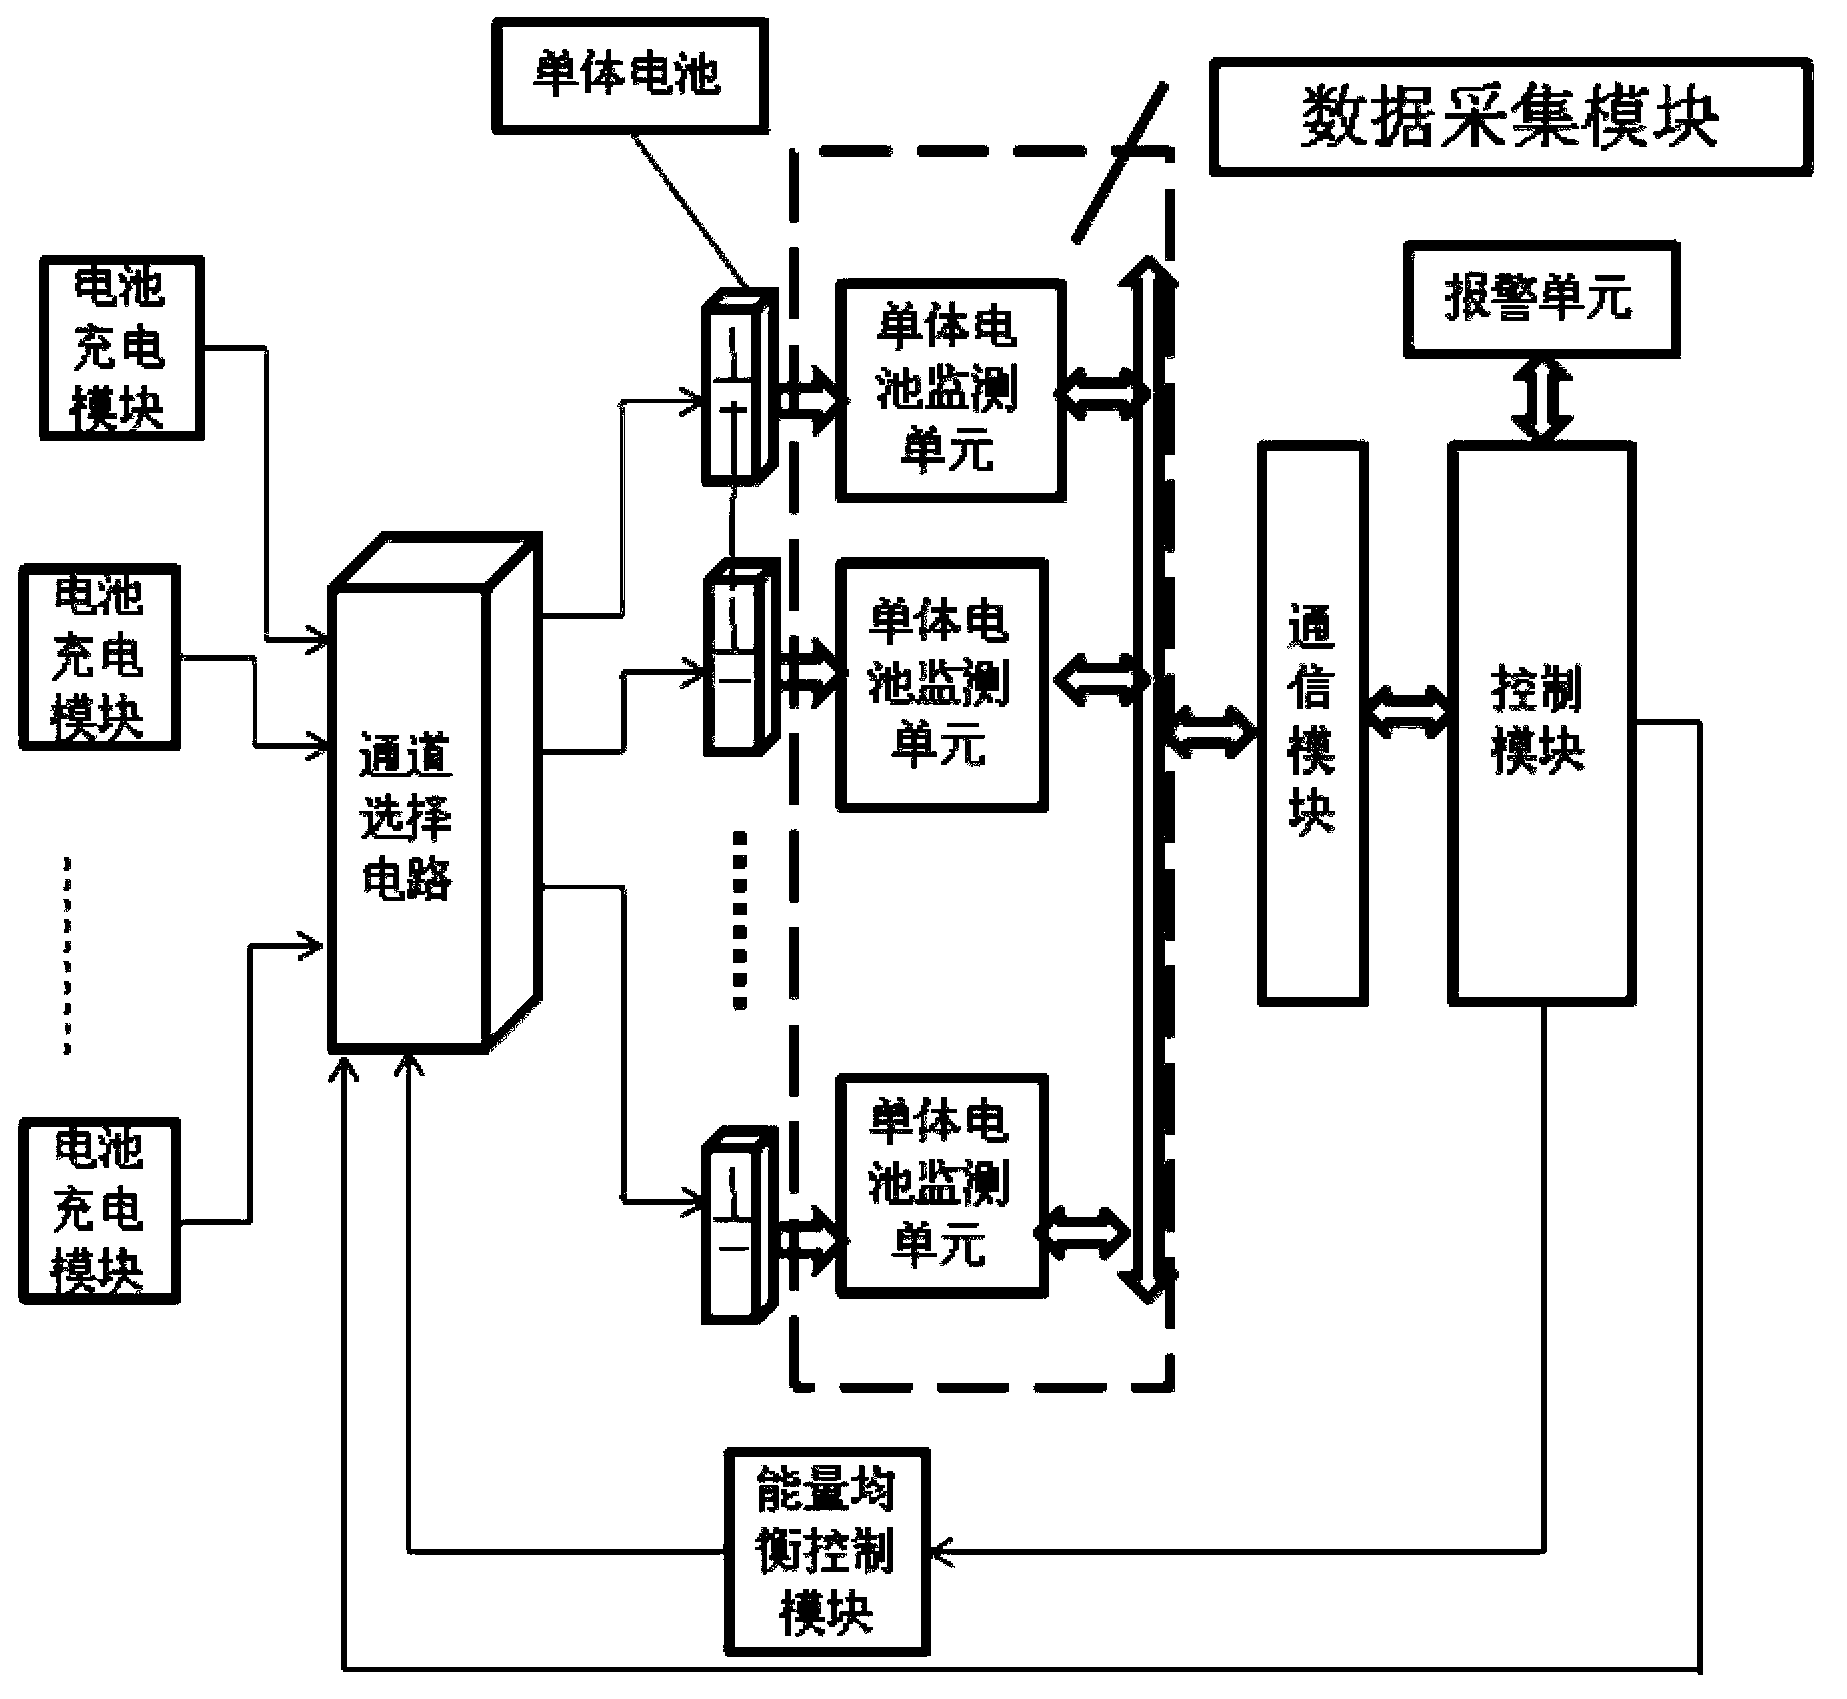 Data collection and energy balance control device and method for lithium battery pack of electromobile